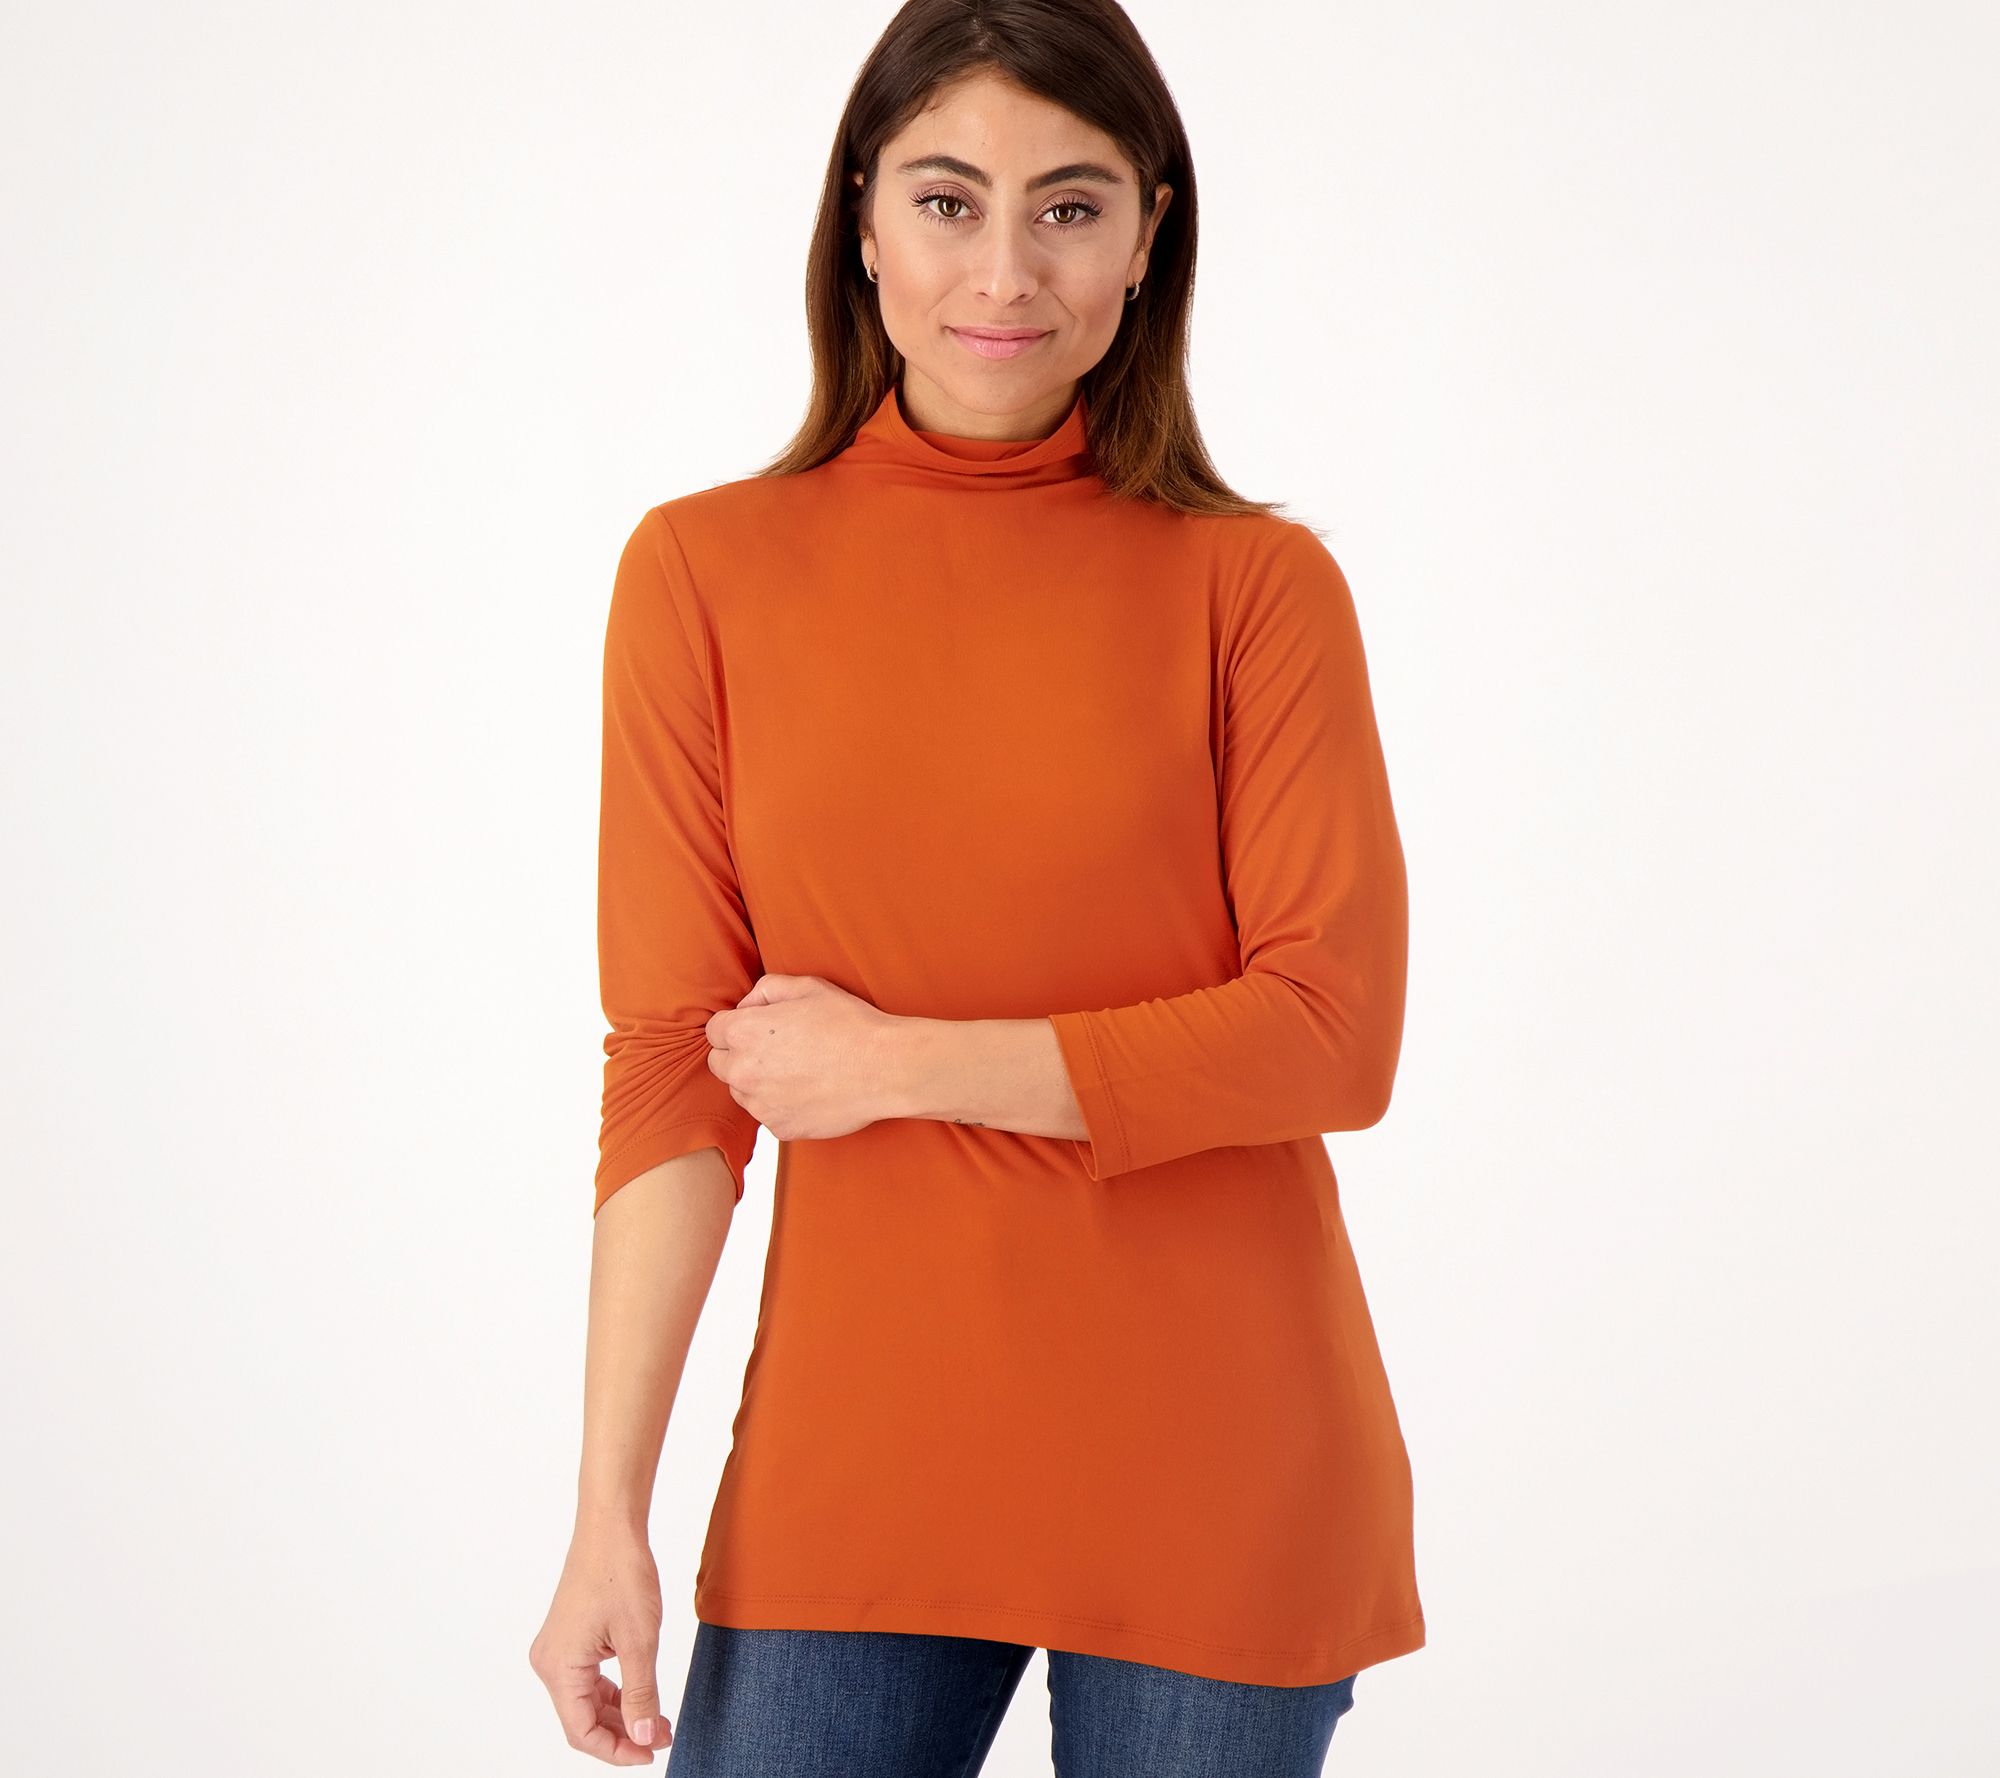 Attitudes by Renee Yummy Jersey Mock Neck Top - QVC.com